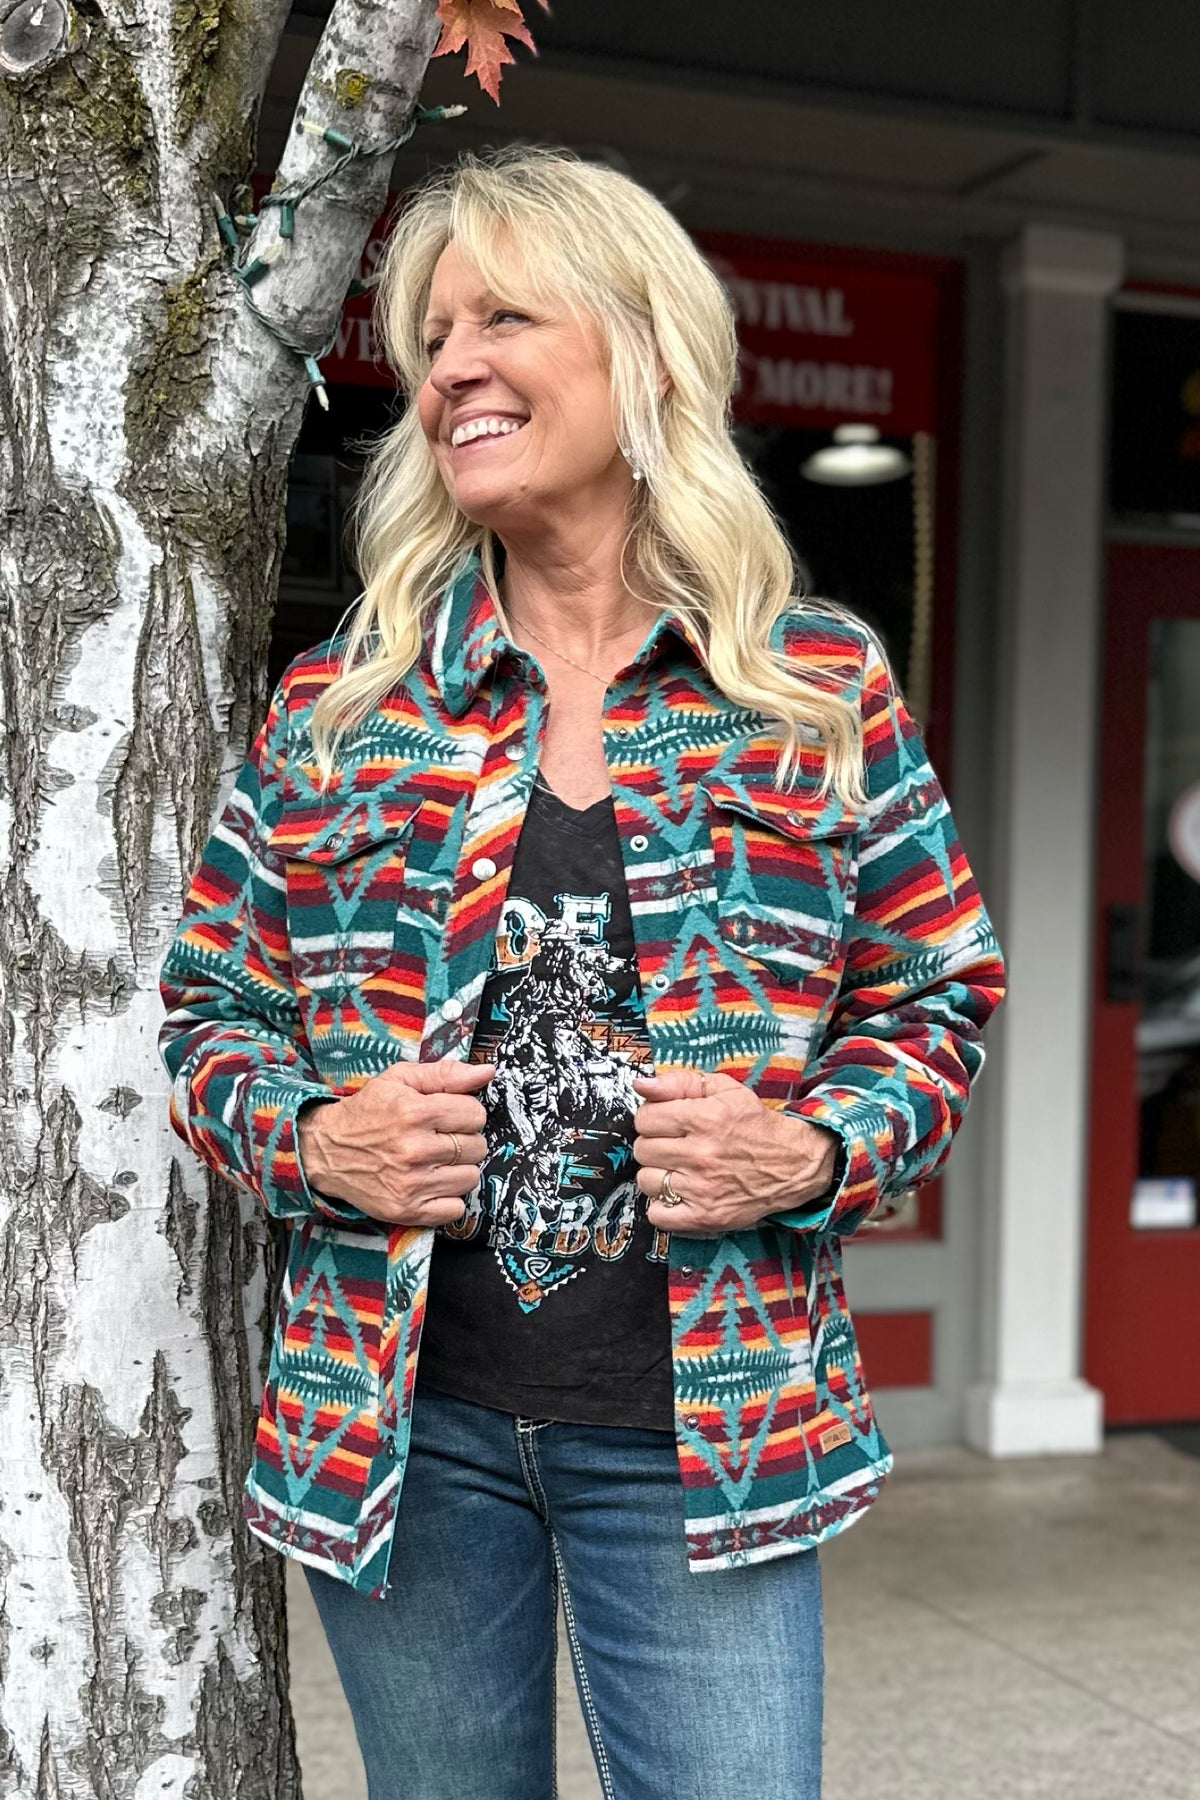 Women's Teal Aztec Jacquard Wool-Blend Shirt Jacket by Powder River-Shacket-Powder River Outfitters-Gallop 'n Glitz- Women's Western Wear Boutique, Located in Grants Pass, Oregon